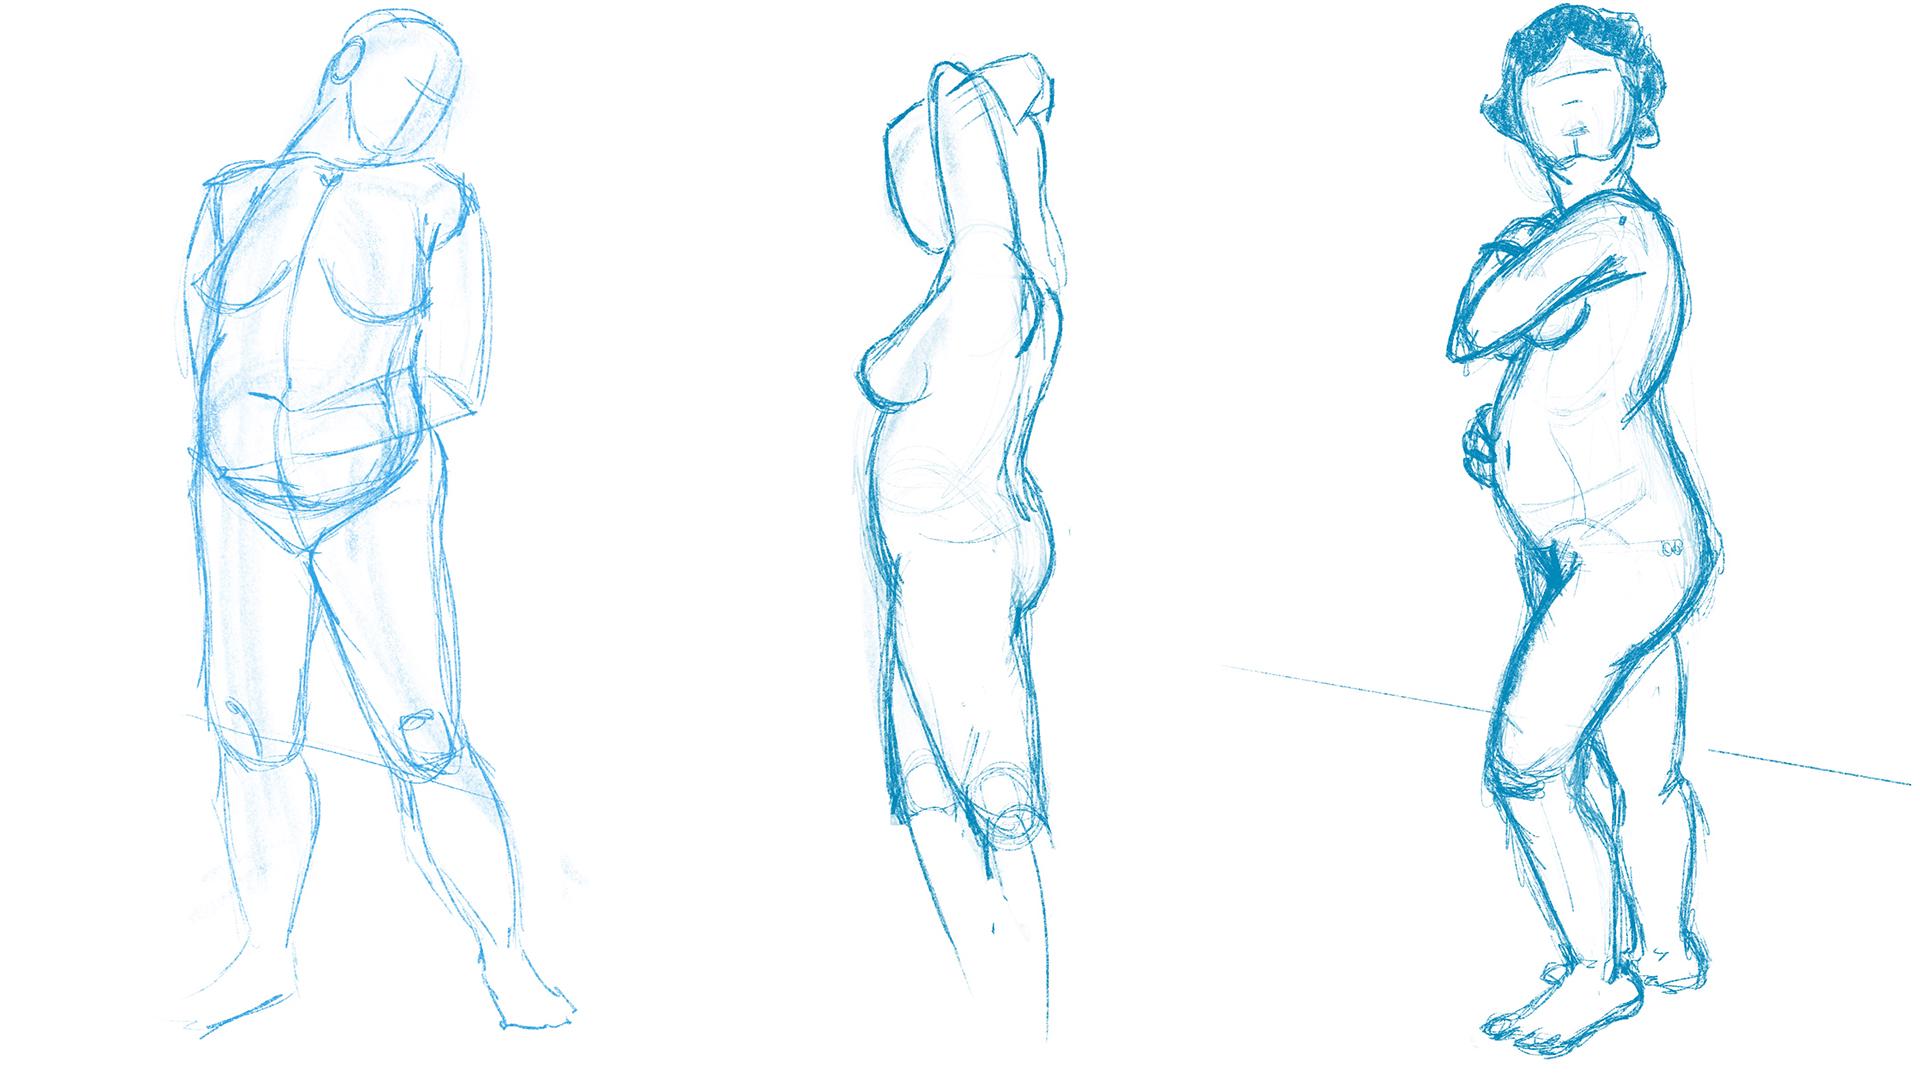 Life-drawing sketches in blue pencil by Adam Westbrook